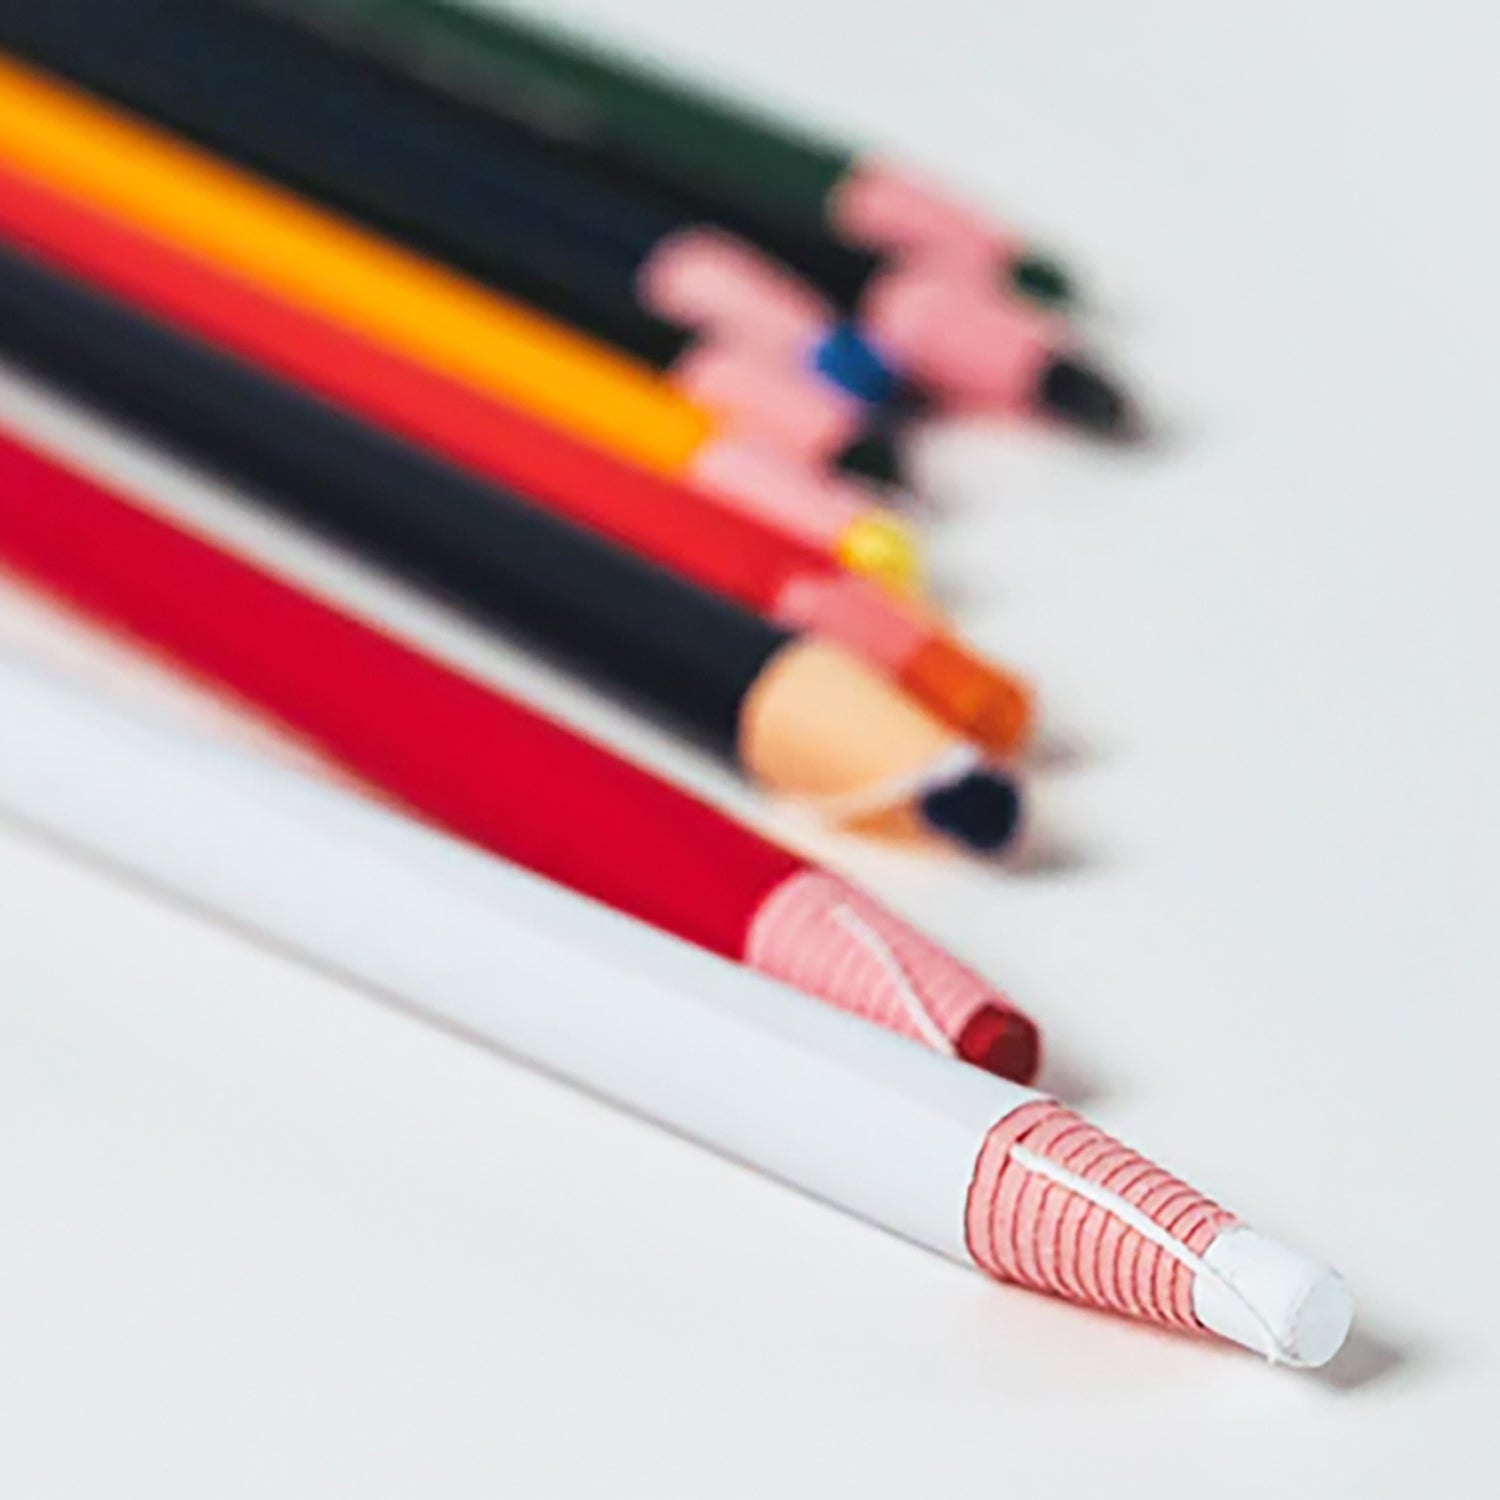 GREASE PENCILS: EVERYTHING YOU NEED TO KNOW